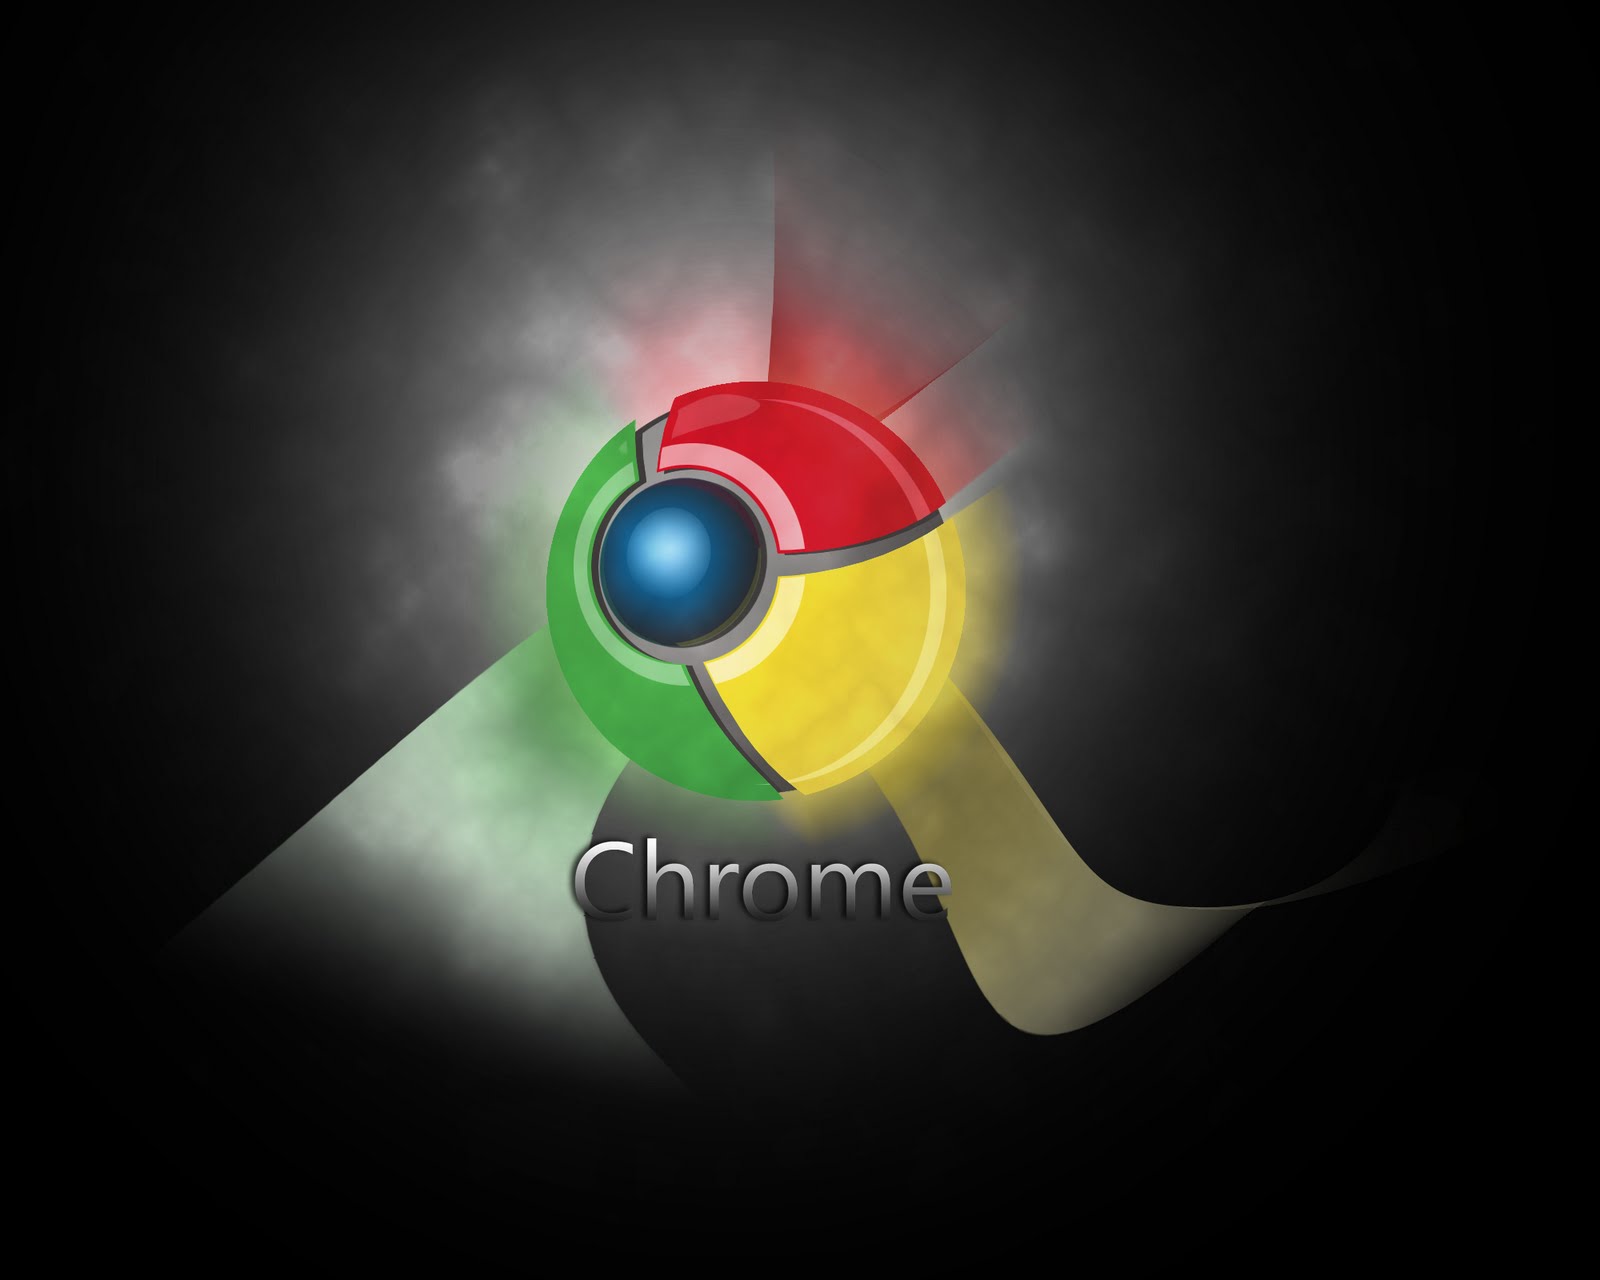 chrome os wallpapers,graphic design,operating system,font,technology,animation